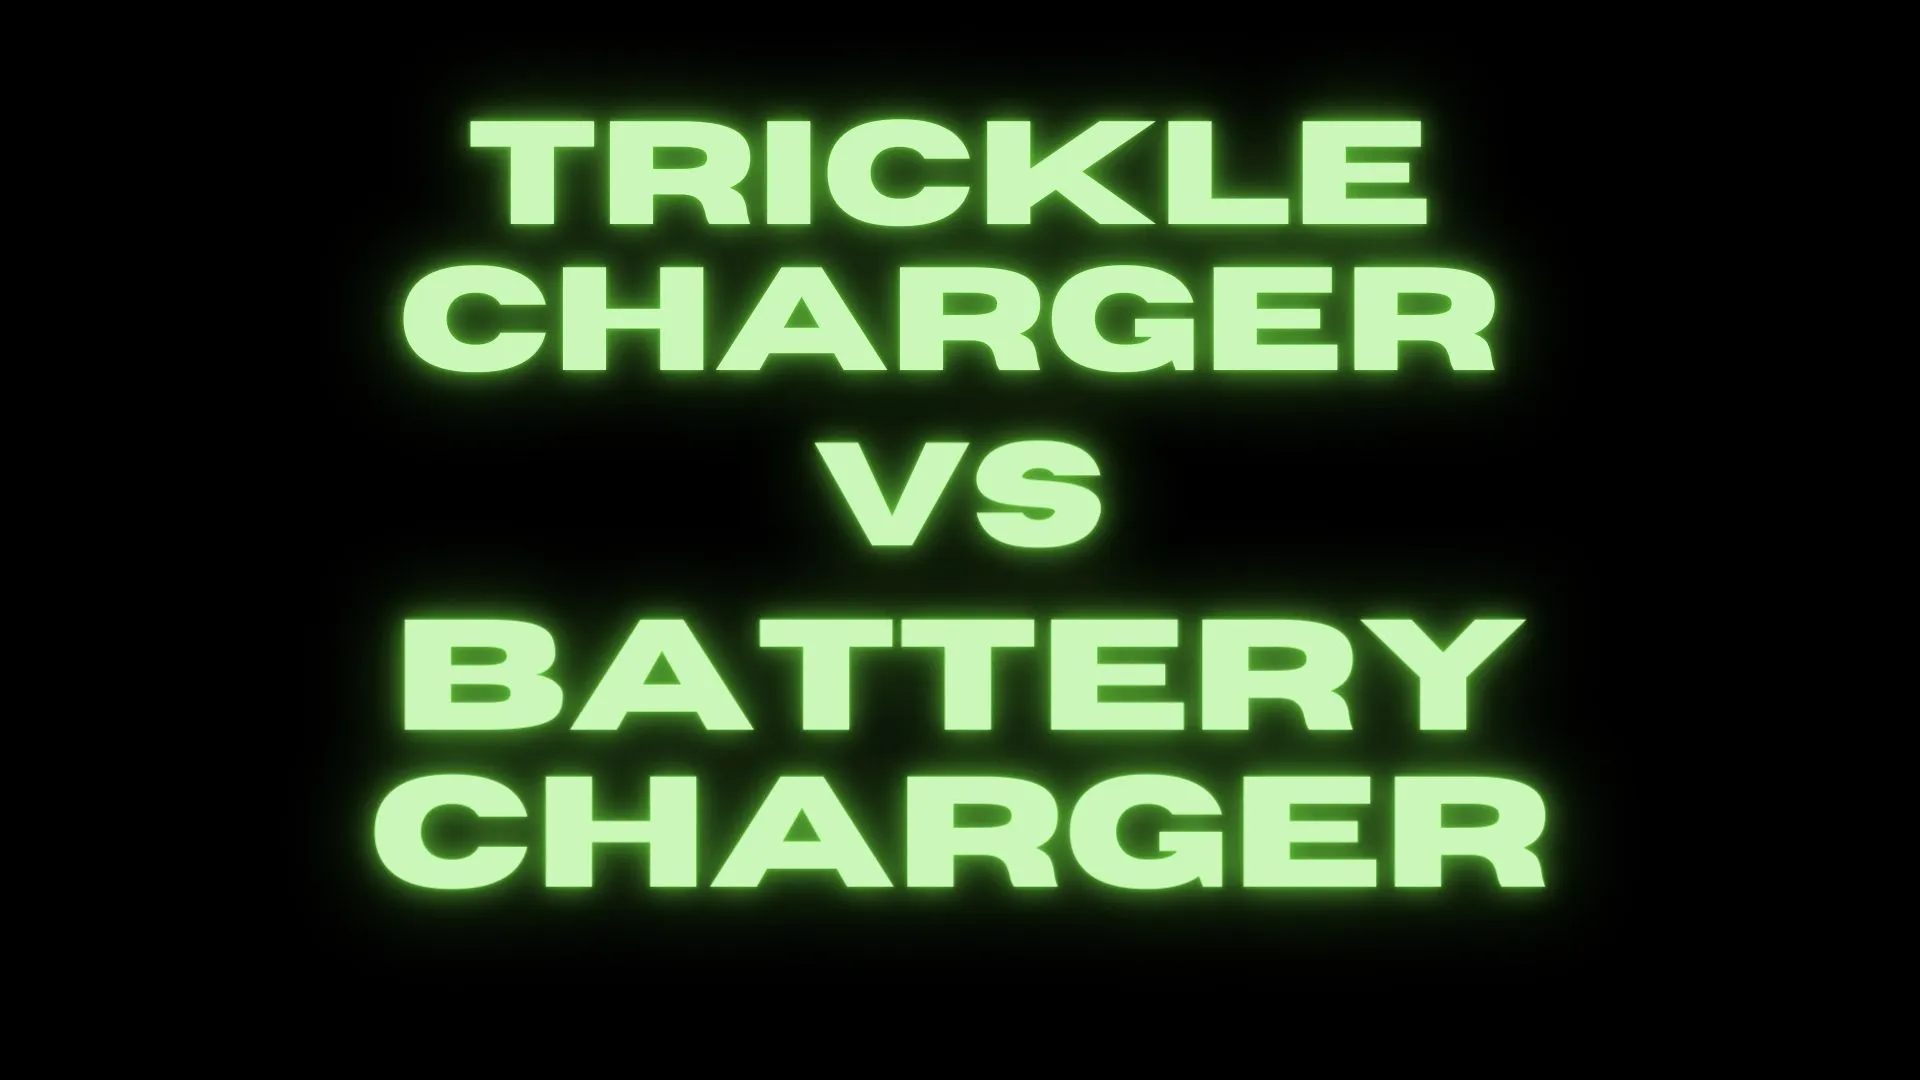 Trickle Charger vs Battery Charger